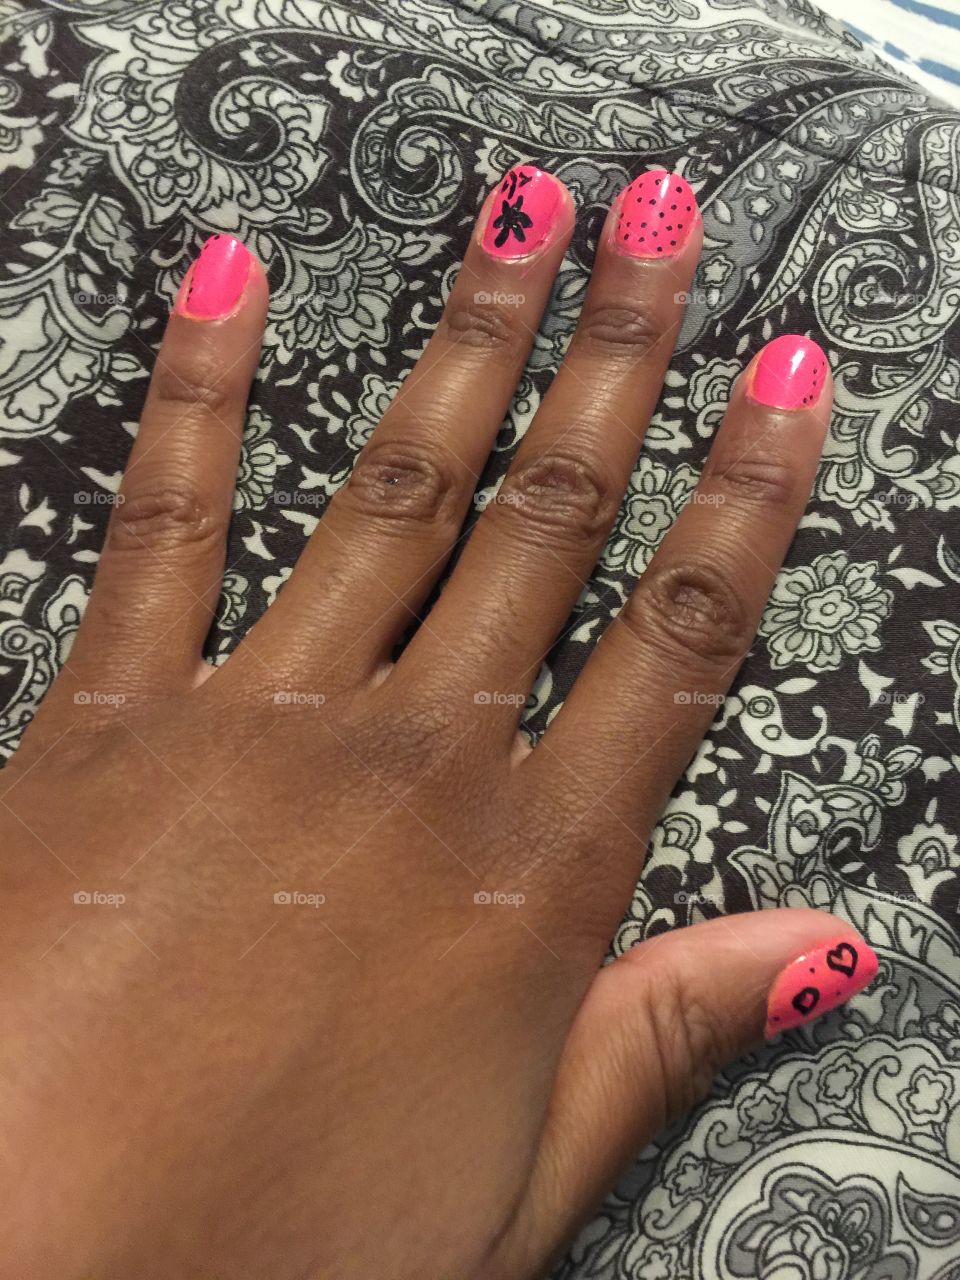 Painted nails my self for the first time!